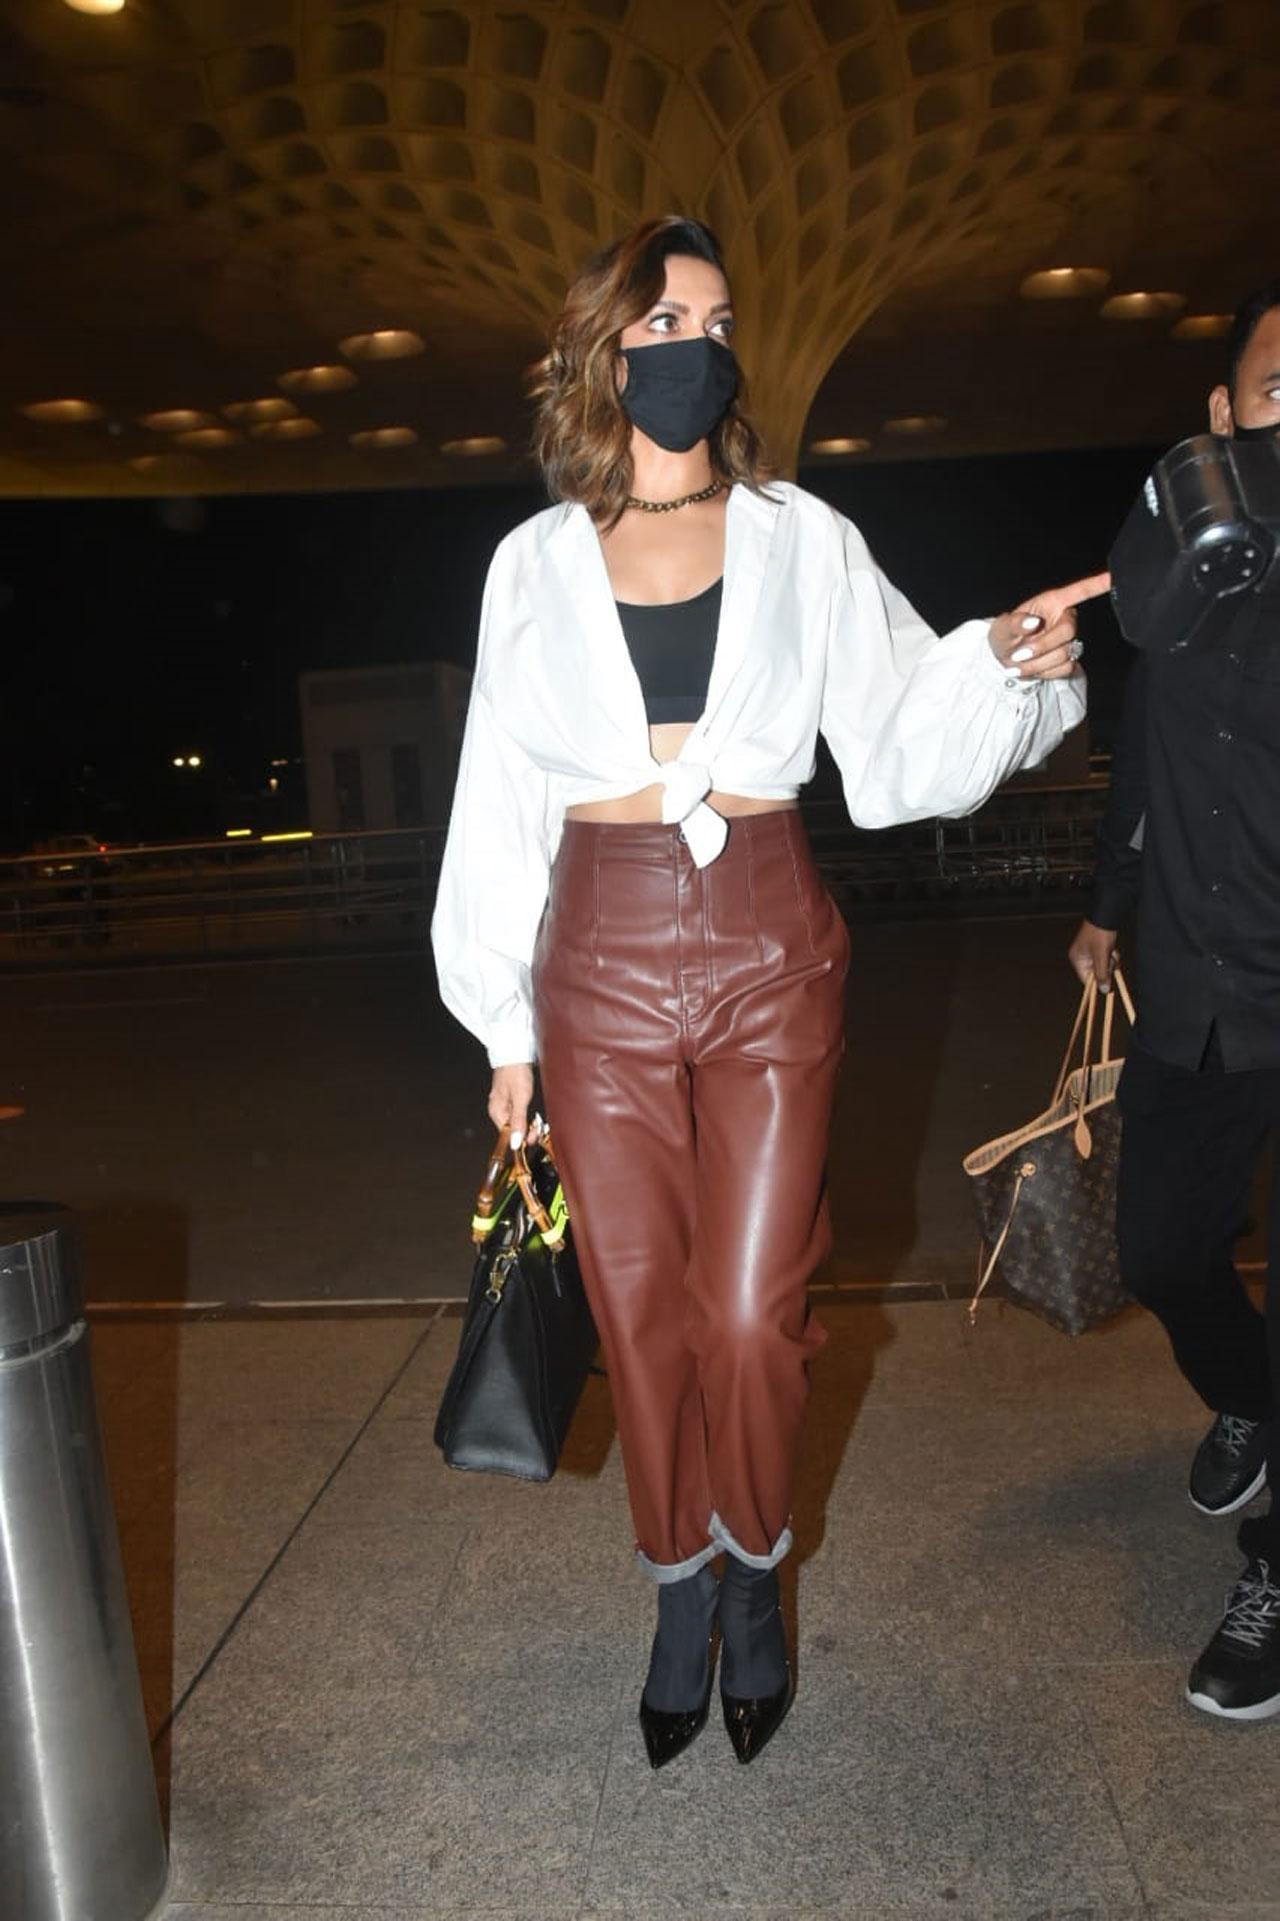 Deepika makes a stunning airport appearance in leather pants and crop shirt image picture